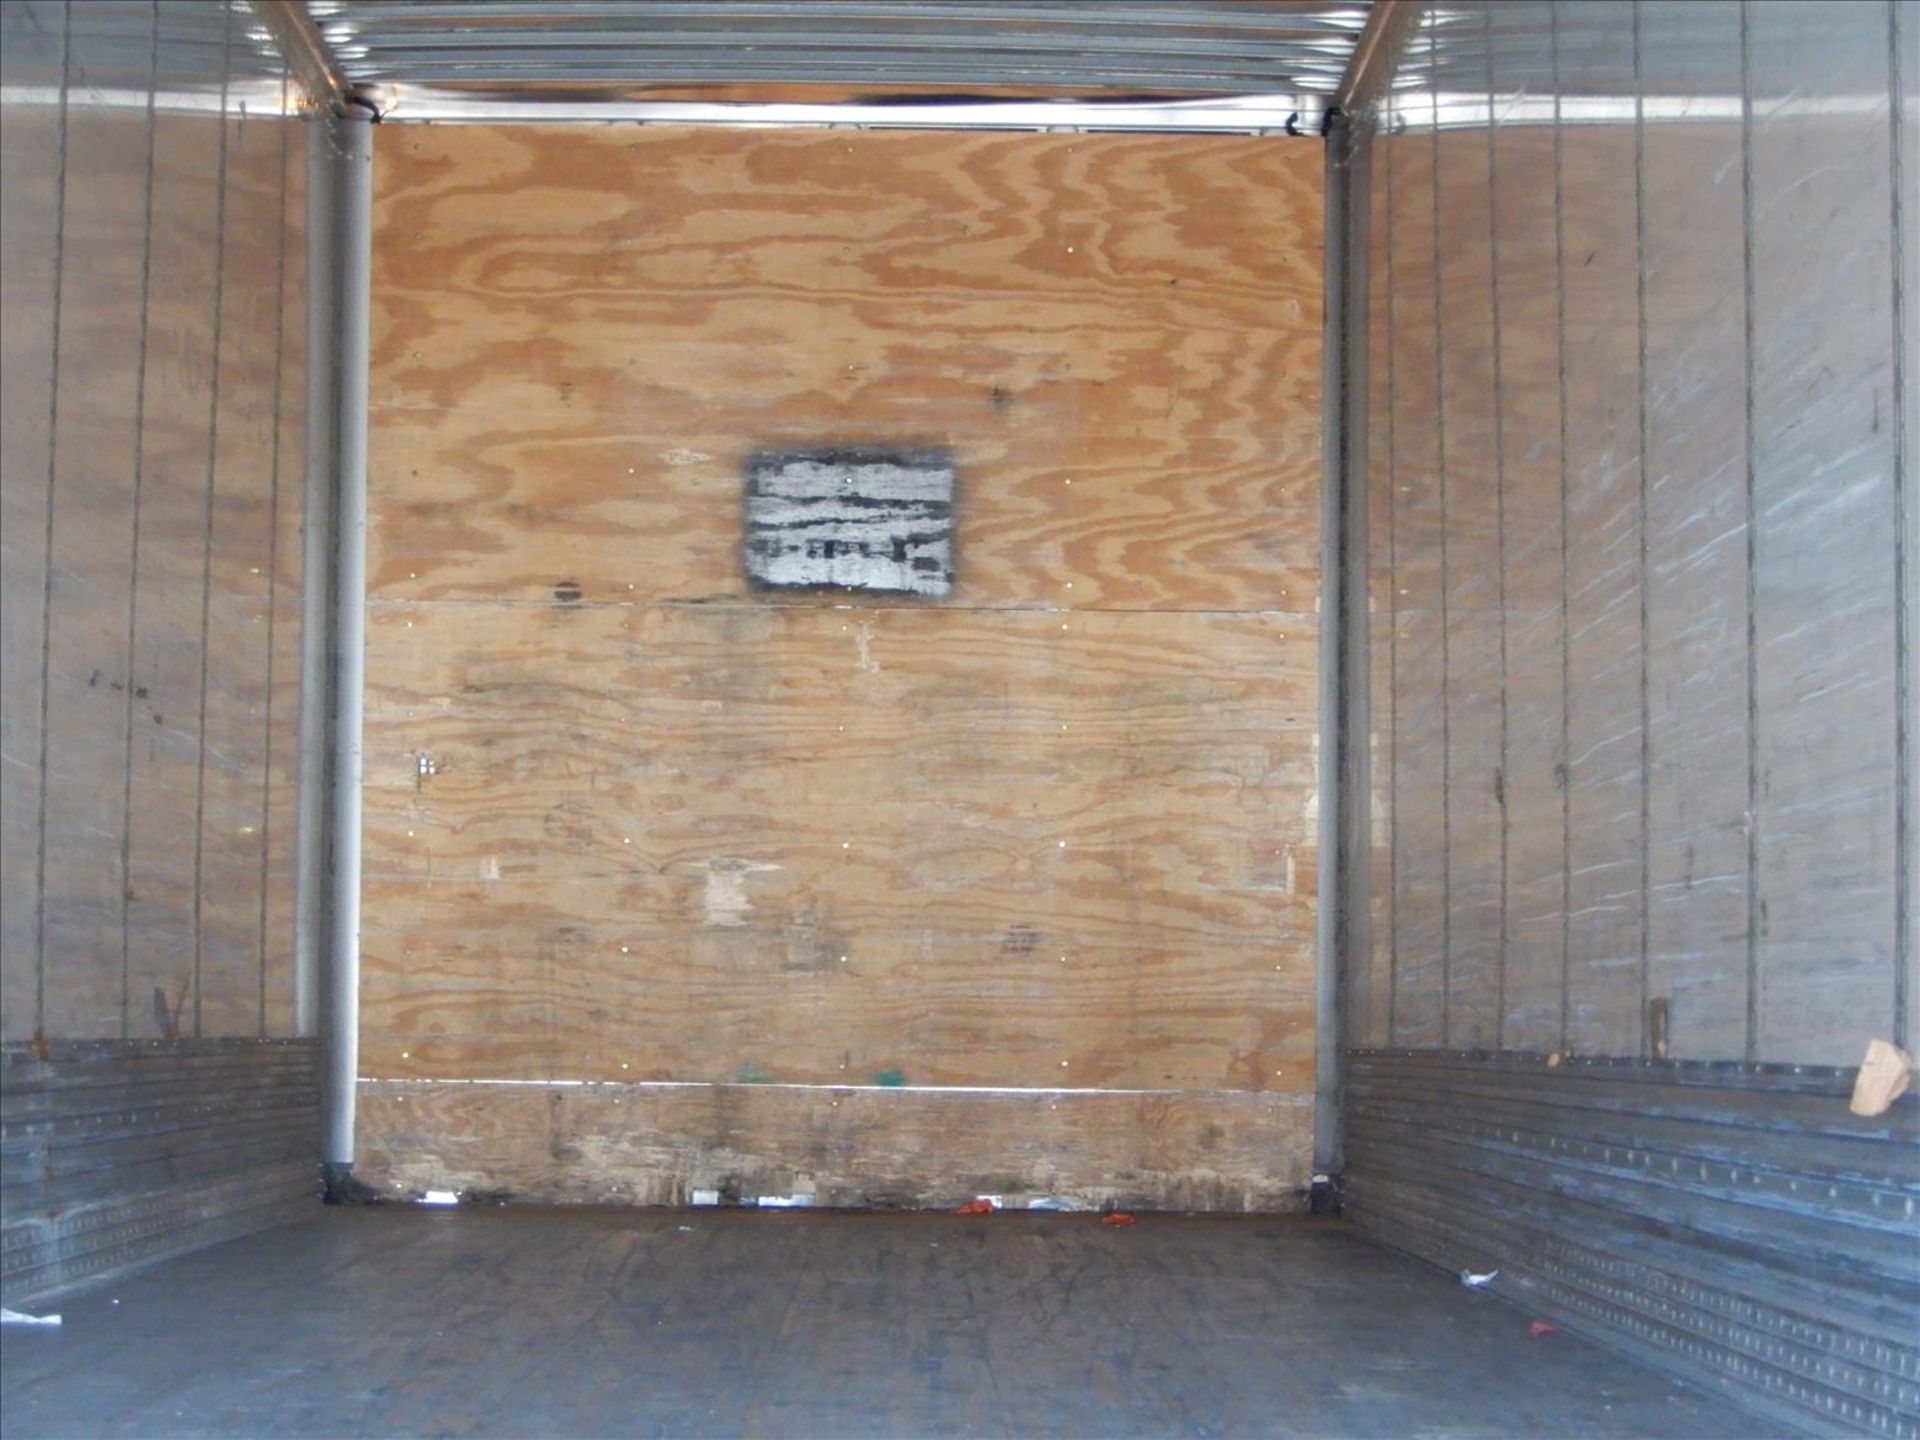 2012 Vanguard Trailer - Located in Indianapolis, IN - Image 24 of 28